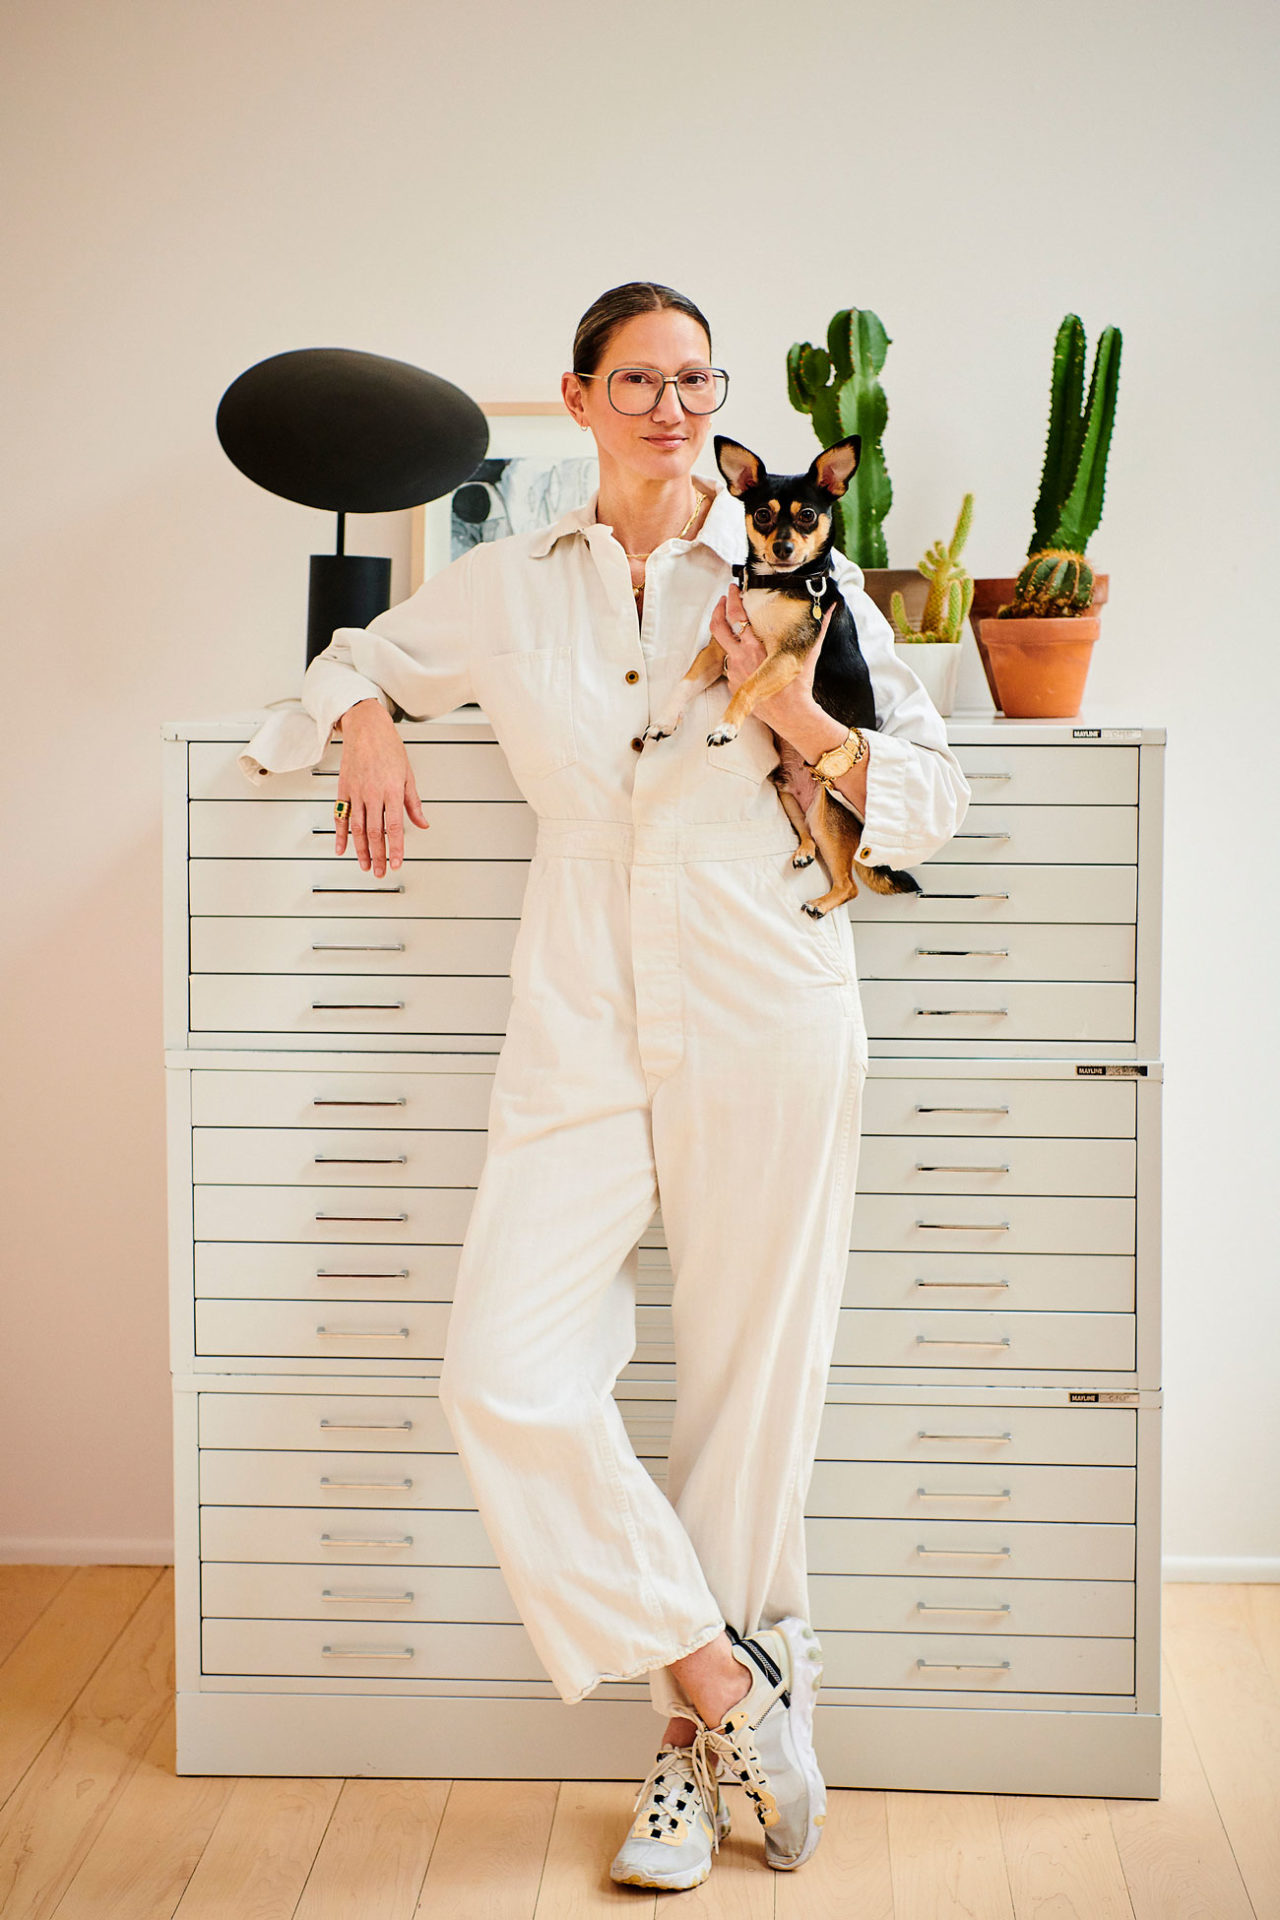 A woman in a white working suit holding a small dog.